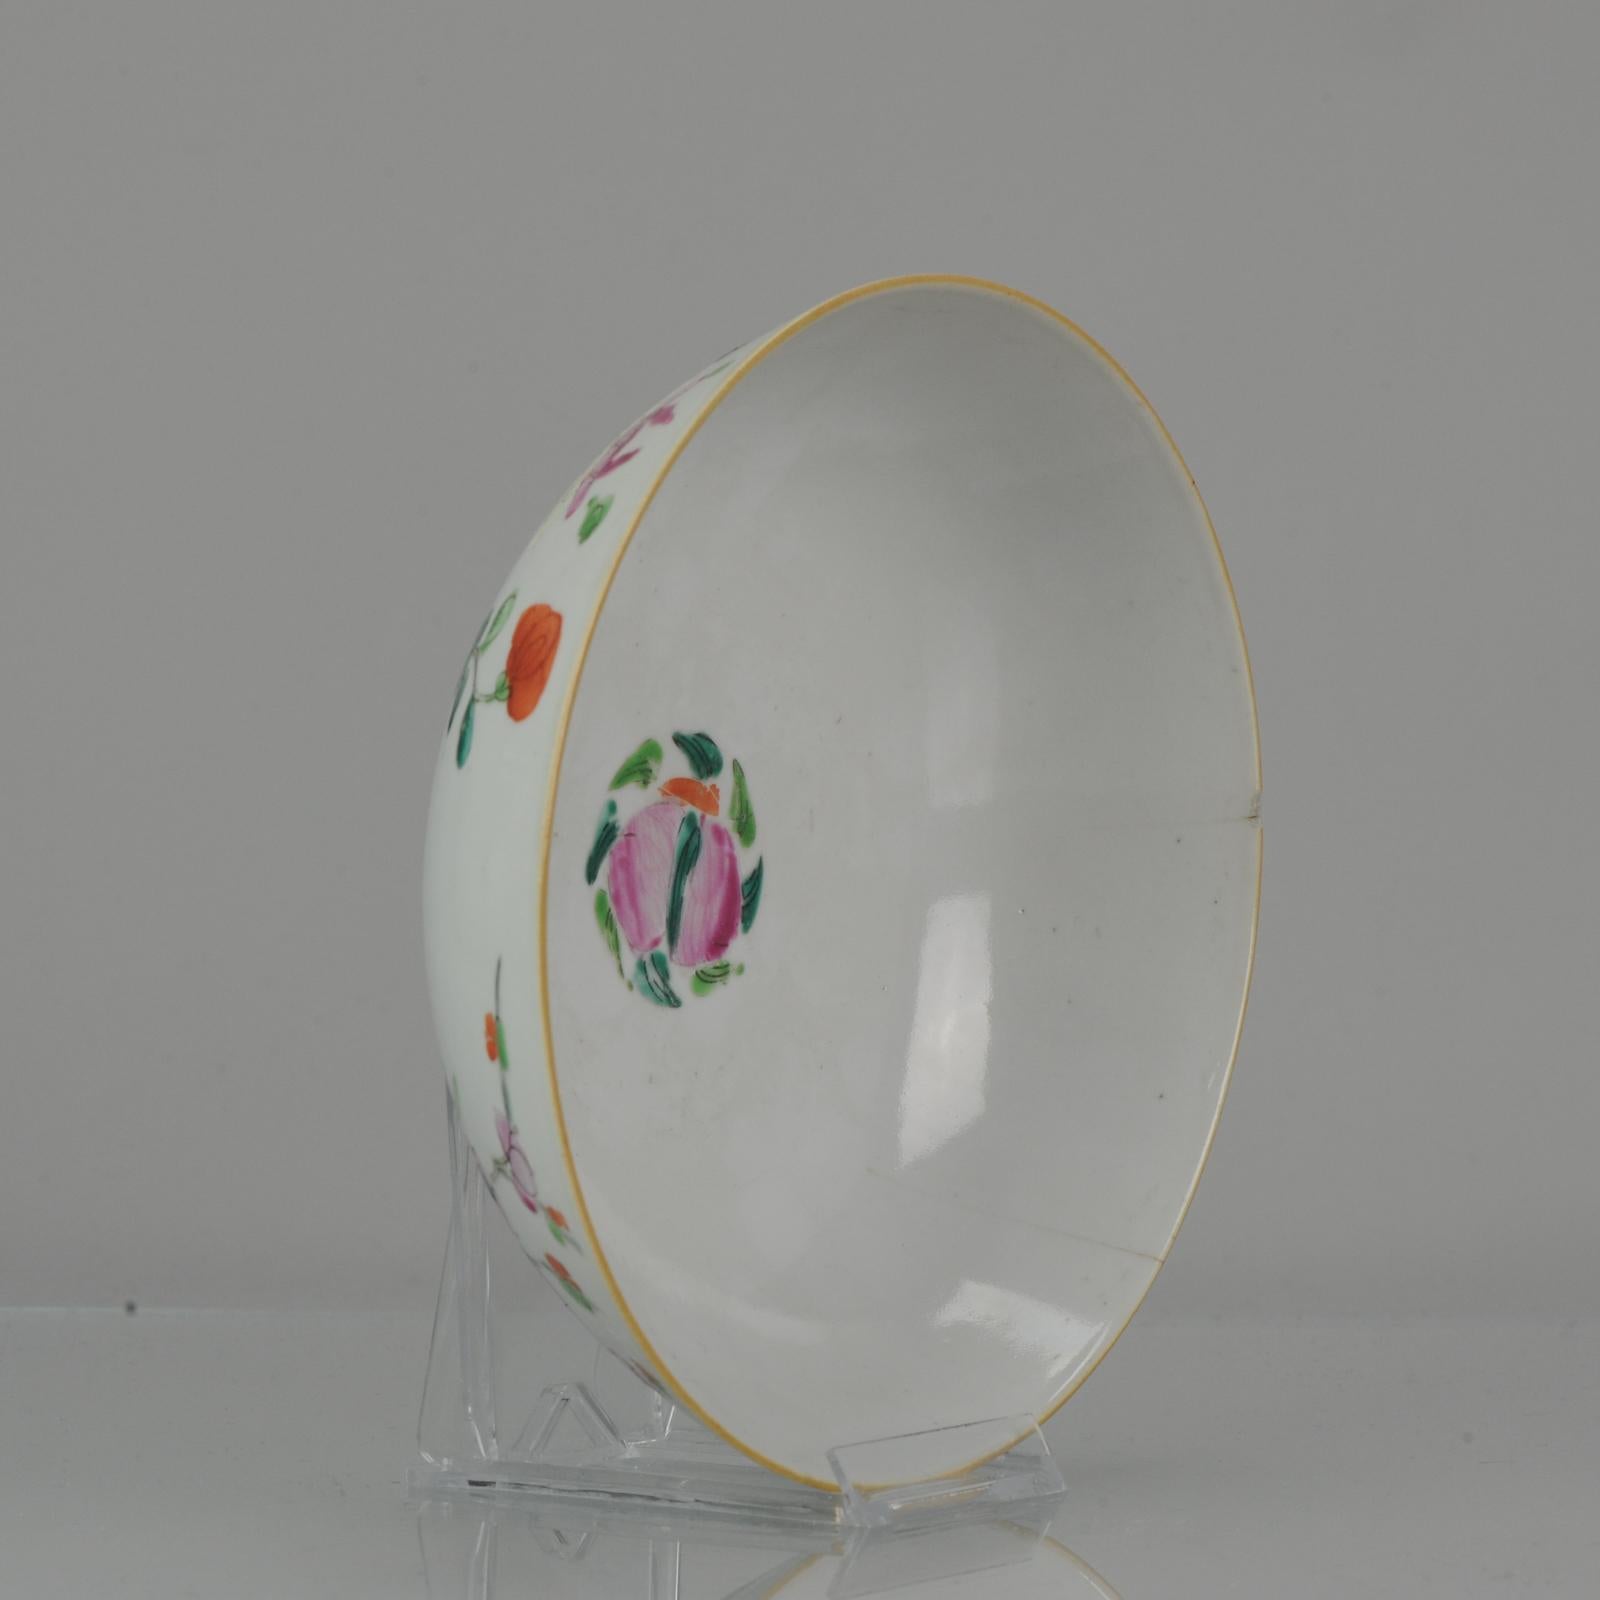 Lovely Chinese porcelain bowl with a cantonese scene of flowers in a Garden. Famille Rose.

Base has an overglaze red mark, endless knot.

Additional information:
Material: Porcelain
Type: Tea Drinking, Teapots
Region of Origin: China
Period: 19th